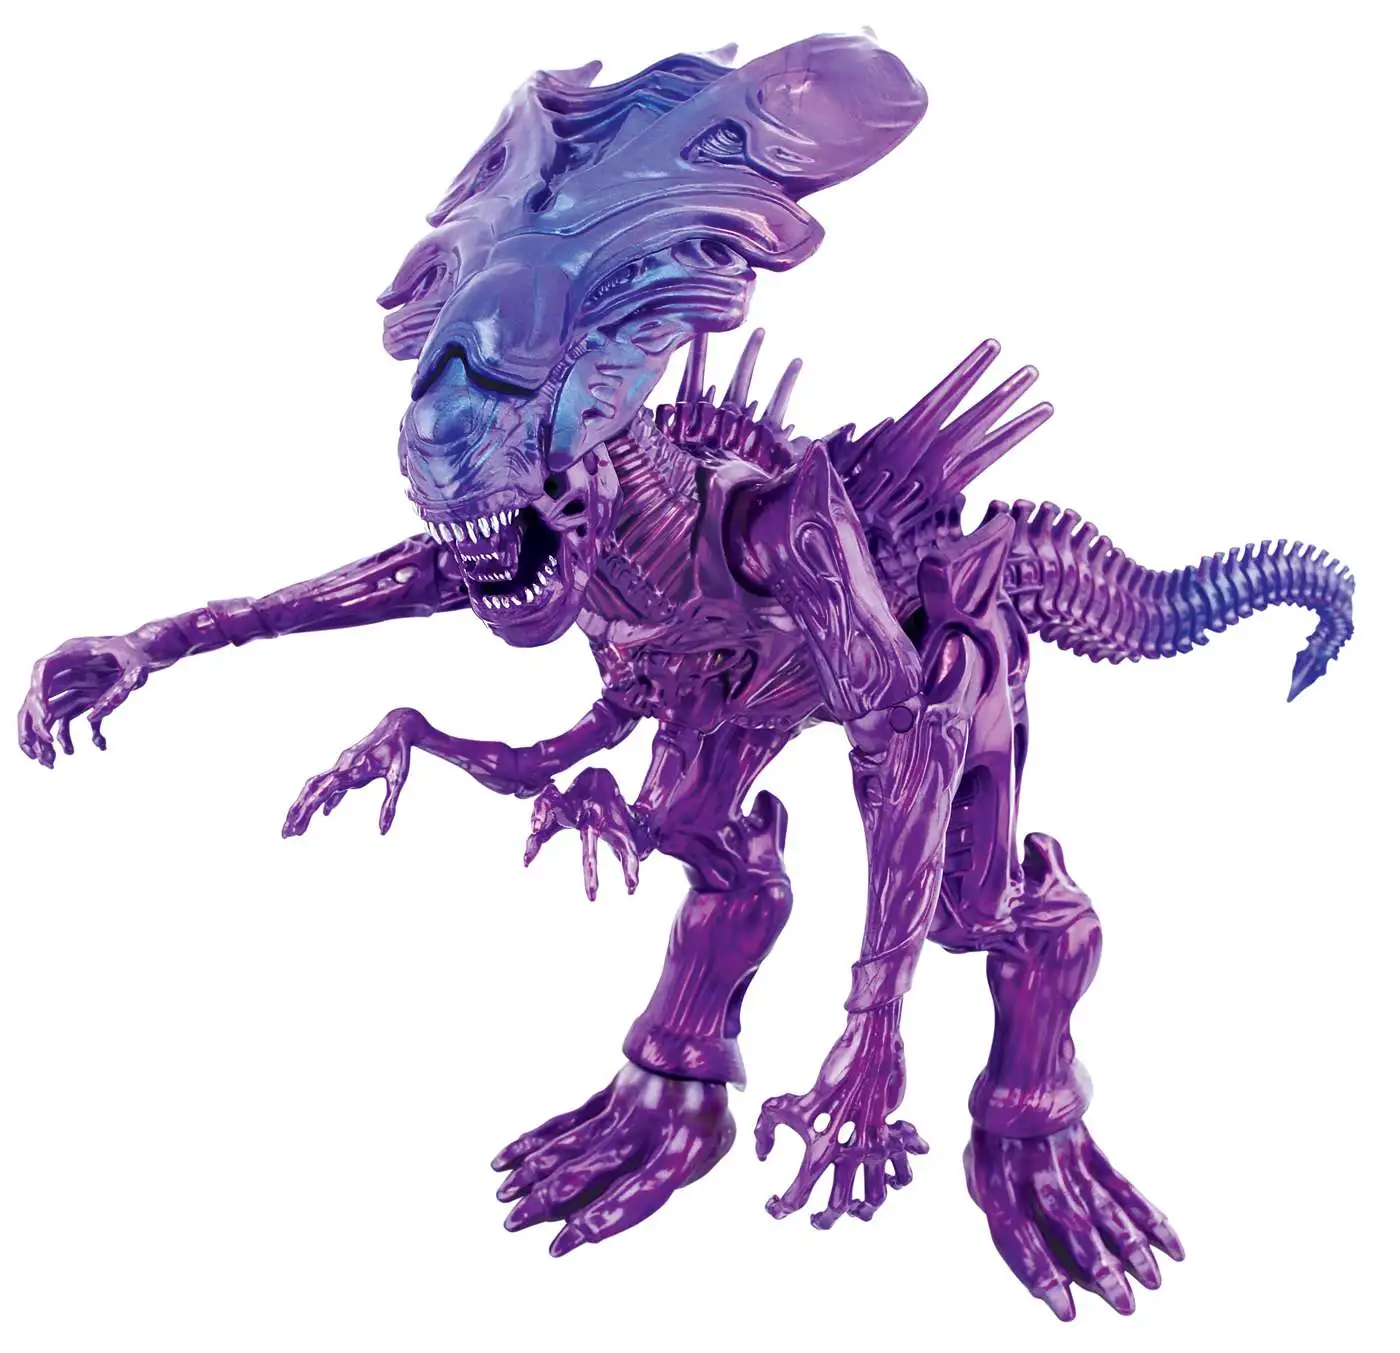 Details about   Alien Queen 12" Giant Poseable Action Creature w/ Chomping Collection Figure Toy 